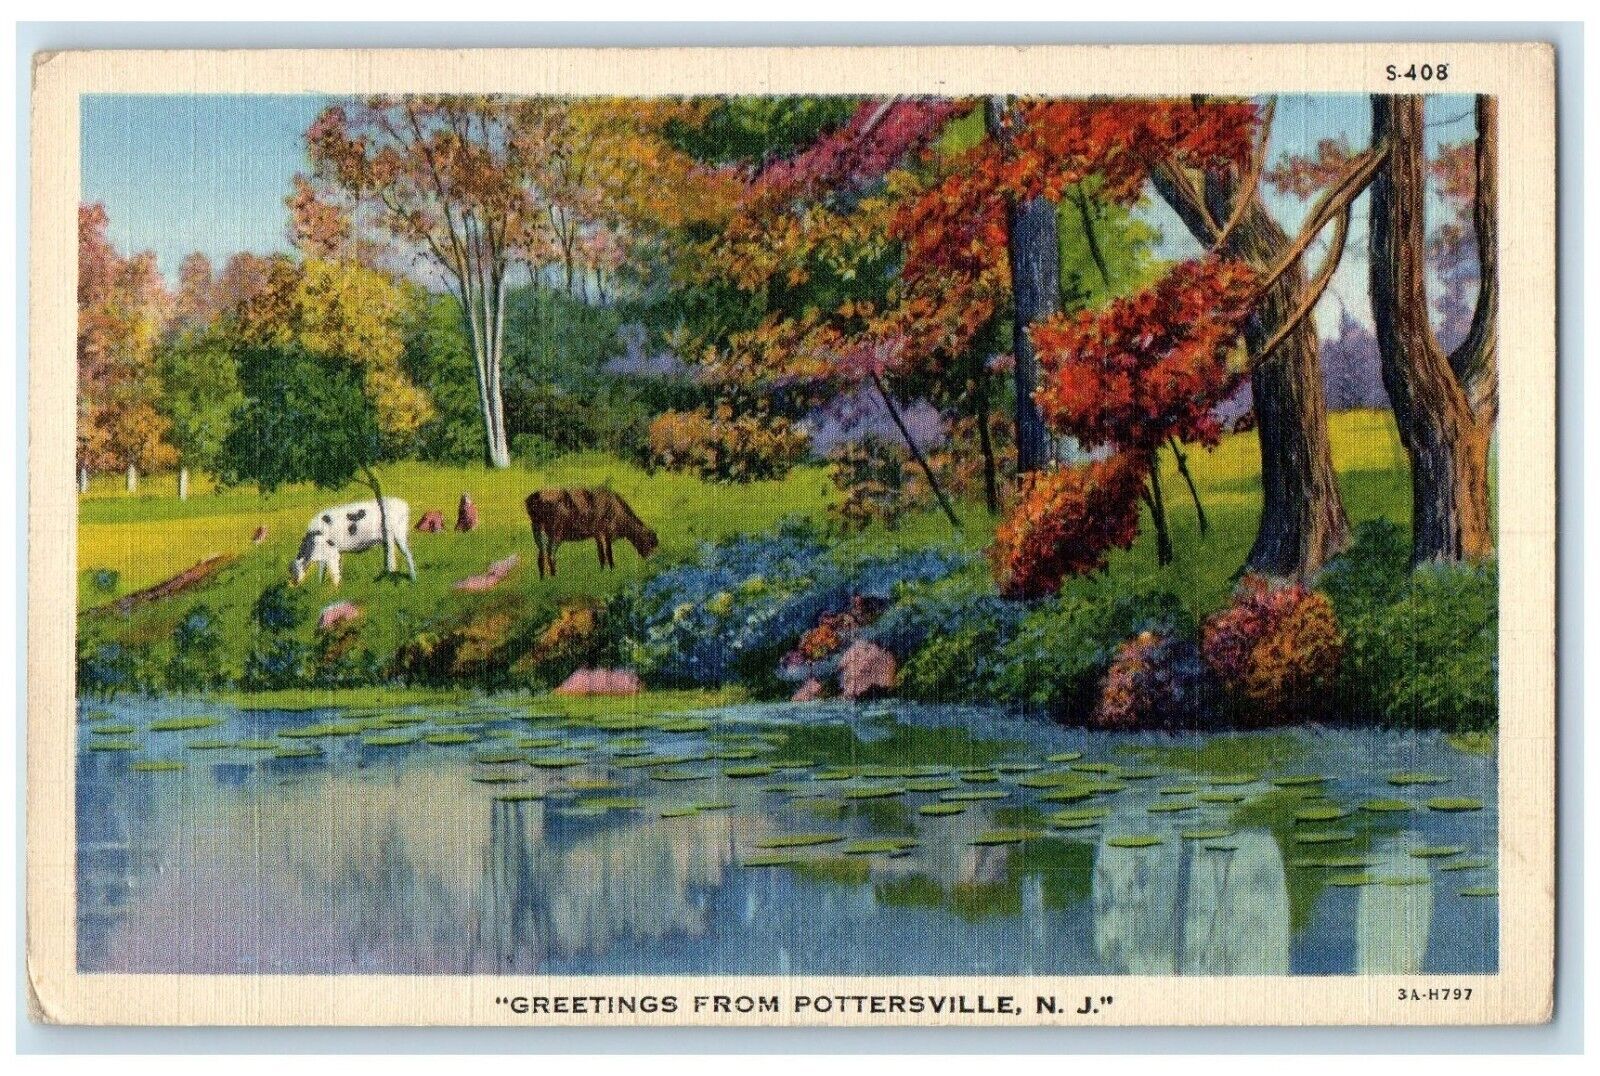 1947 Greetings From River Lake Pottersville New Jersey Vintage Antique Postcard